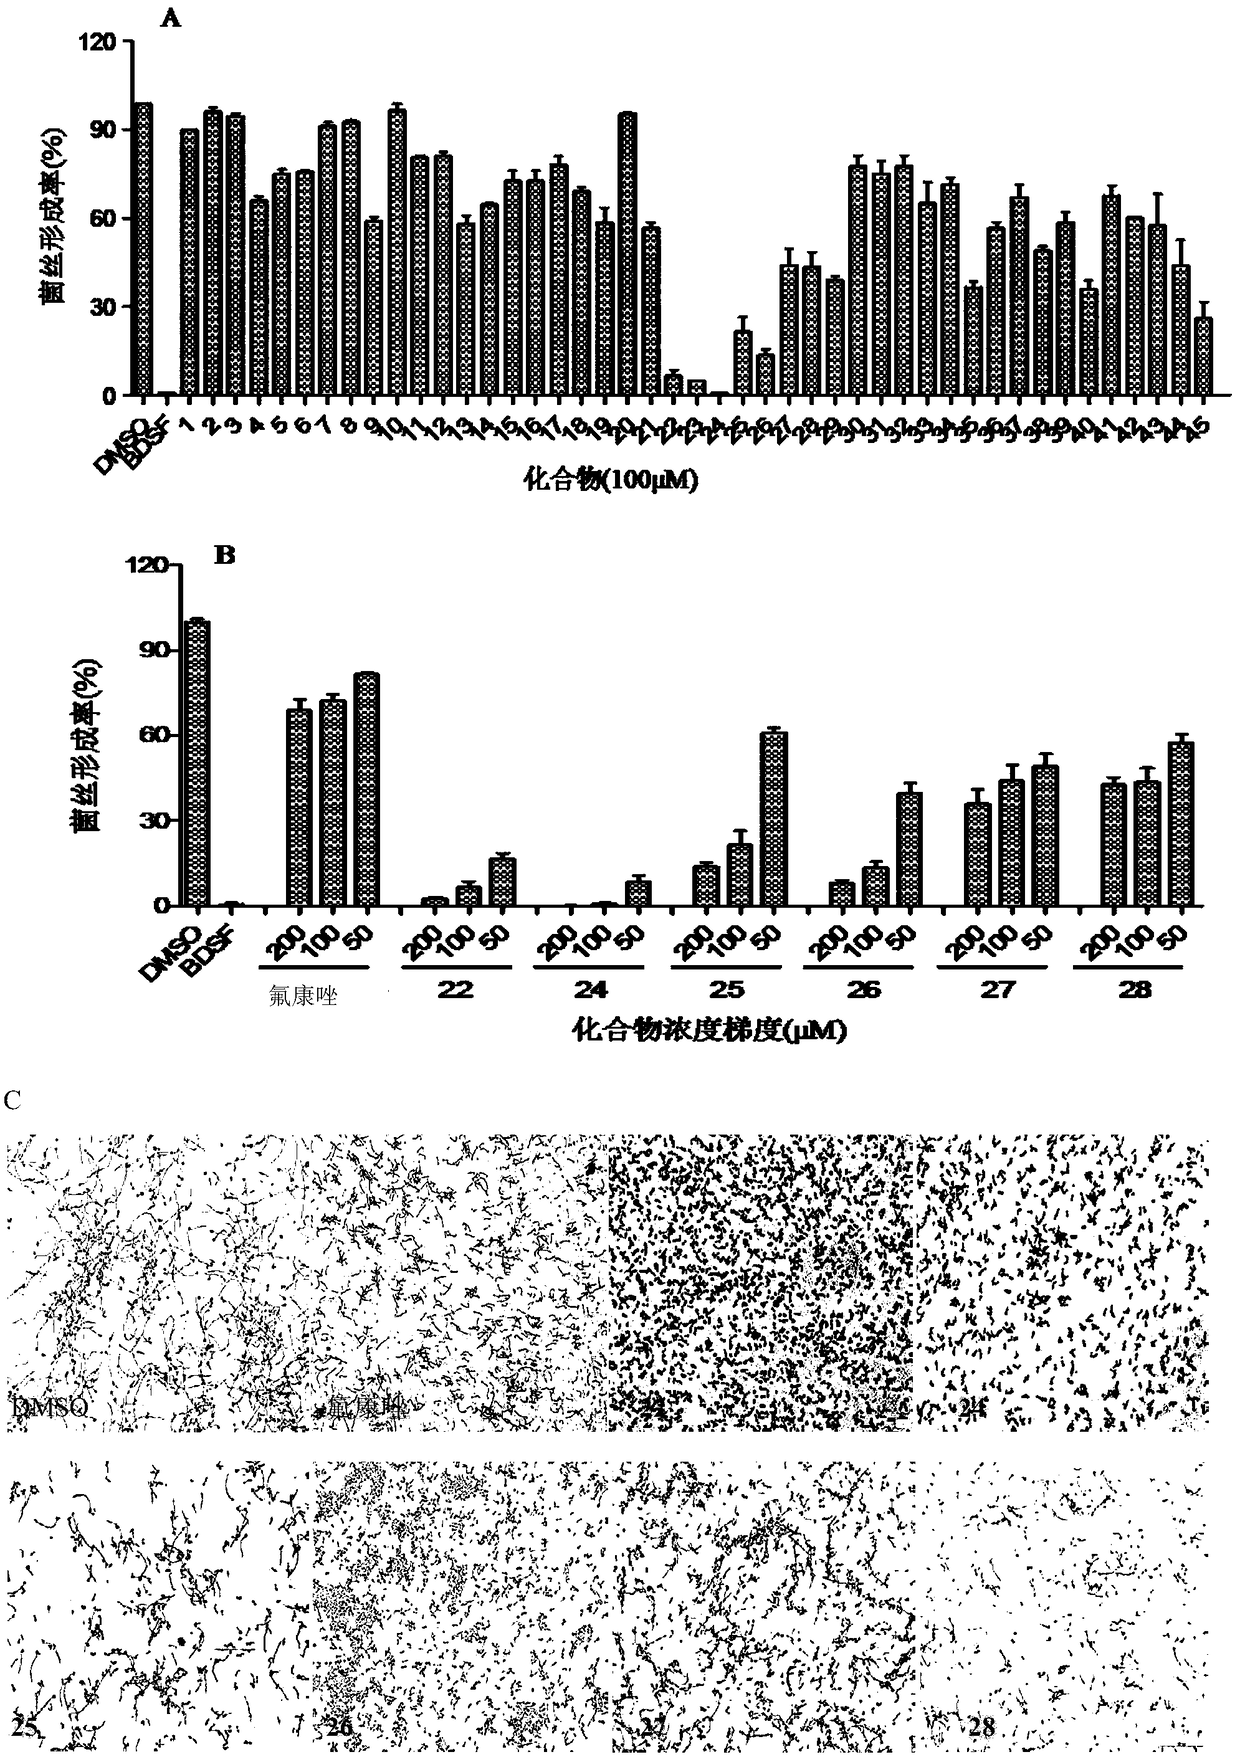 Anti-candida albicans piperazine derivative, preparation method therefor and application thereof